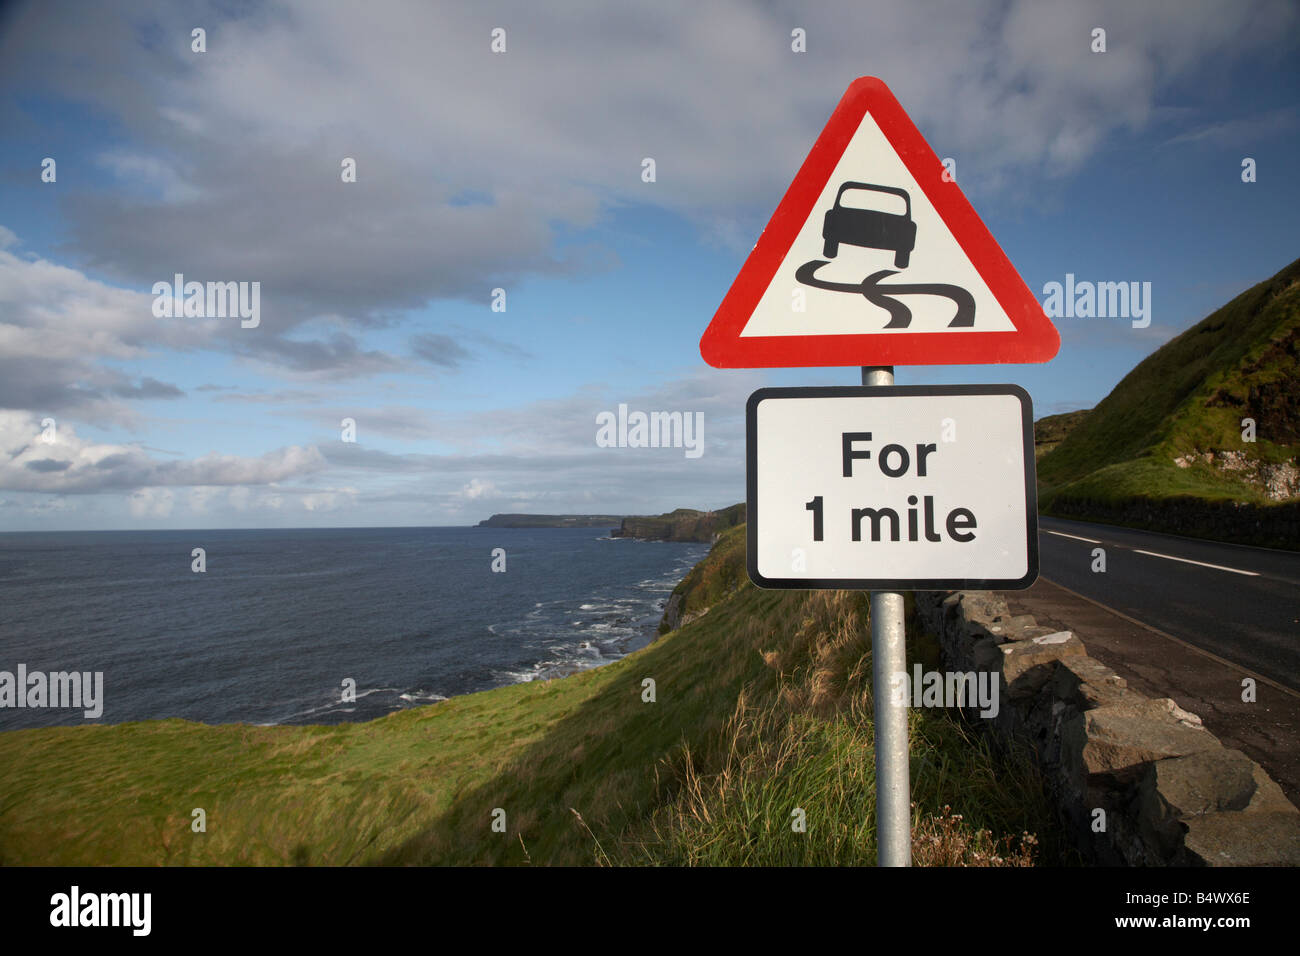 slippery road danger red warning triangle for 1 mile sign on the famous A2 north antrim causeway coastal road route Stock Photo